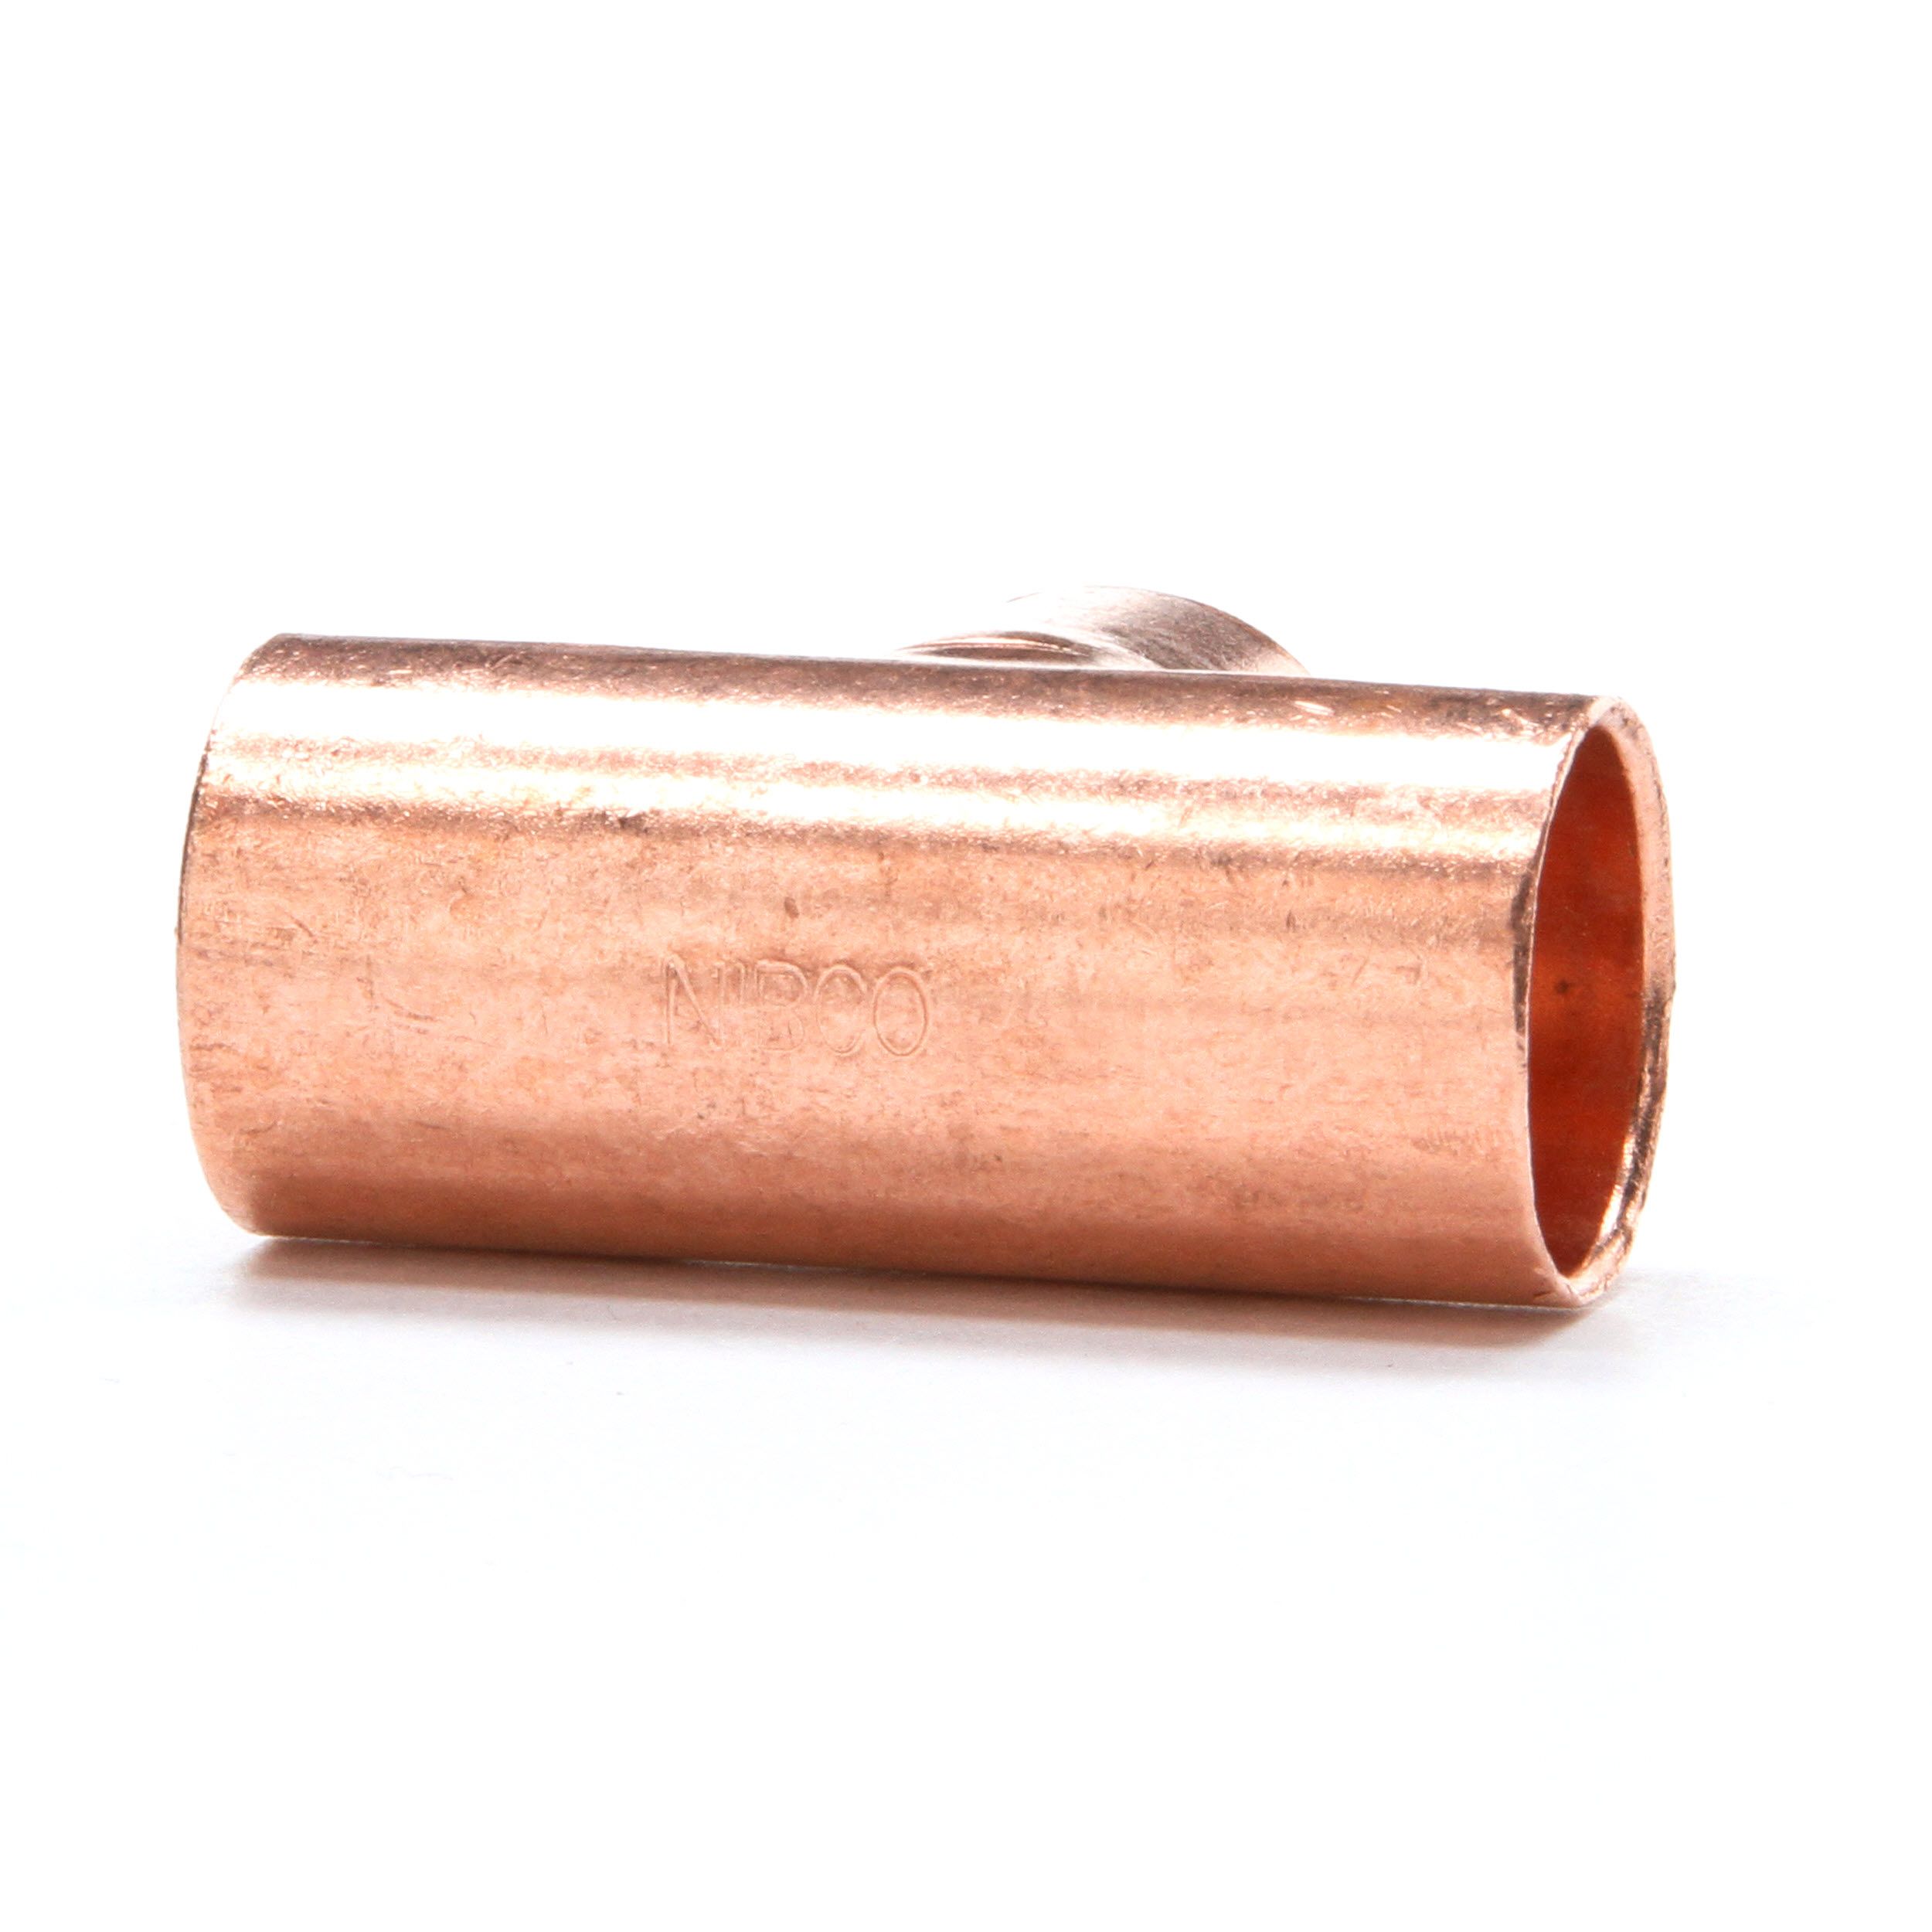 NIBCO 3/8" STRAIGHT COPPER COUPLING W/SWEAT SOCKETS 3 